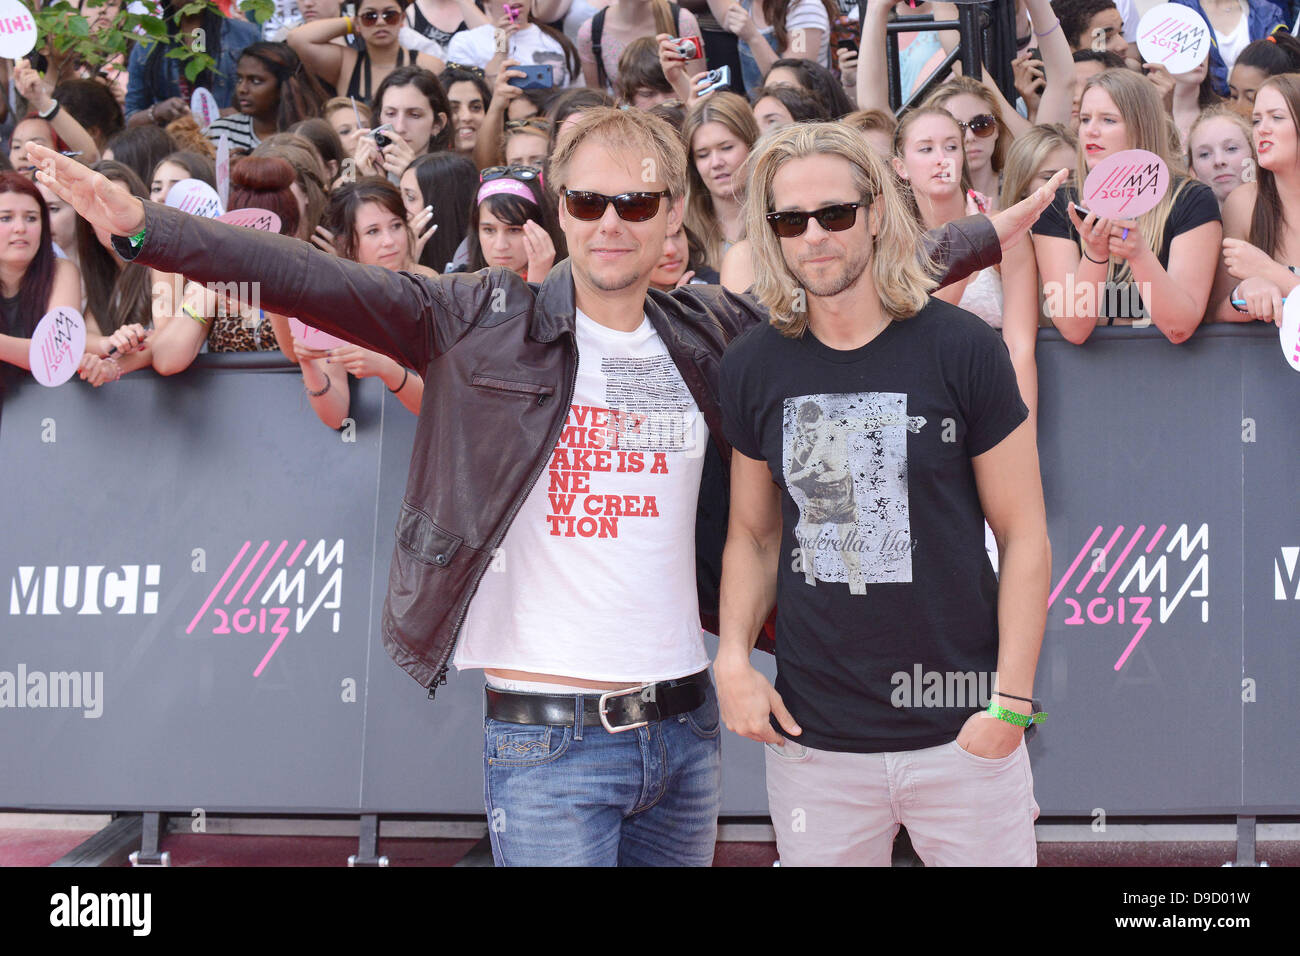 Toronto, Canada. June 16, 2013. The 2013 MuchMusic Video Awards arrival. In picture, Armin ban Burren and Trevor Guthrie (Credit: EXImages/Alamy Live News) Stock Photo